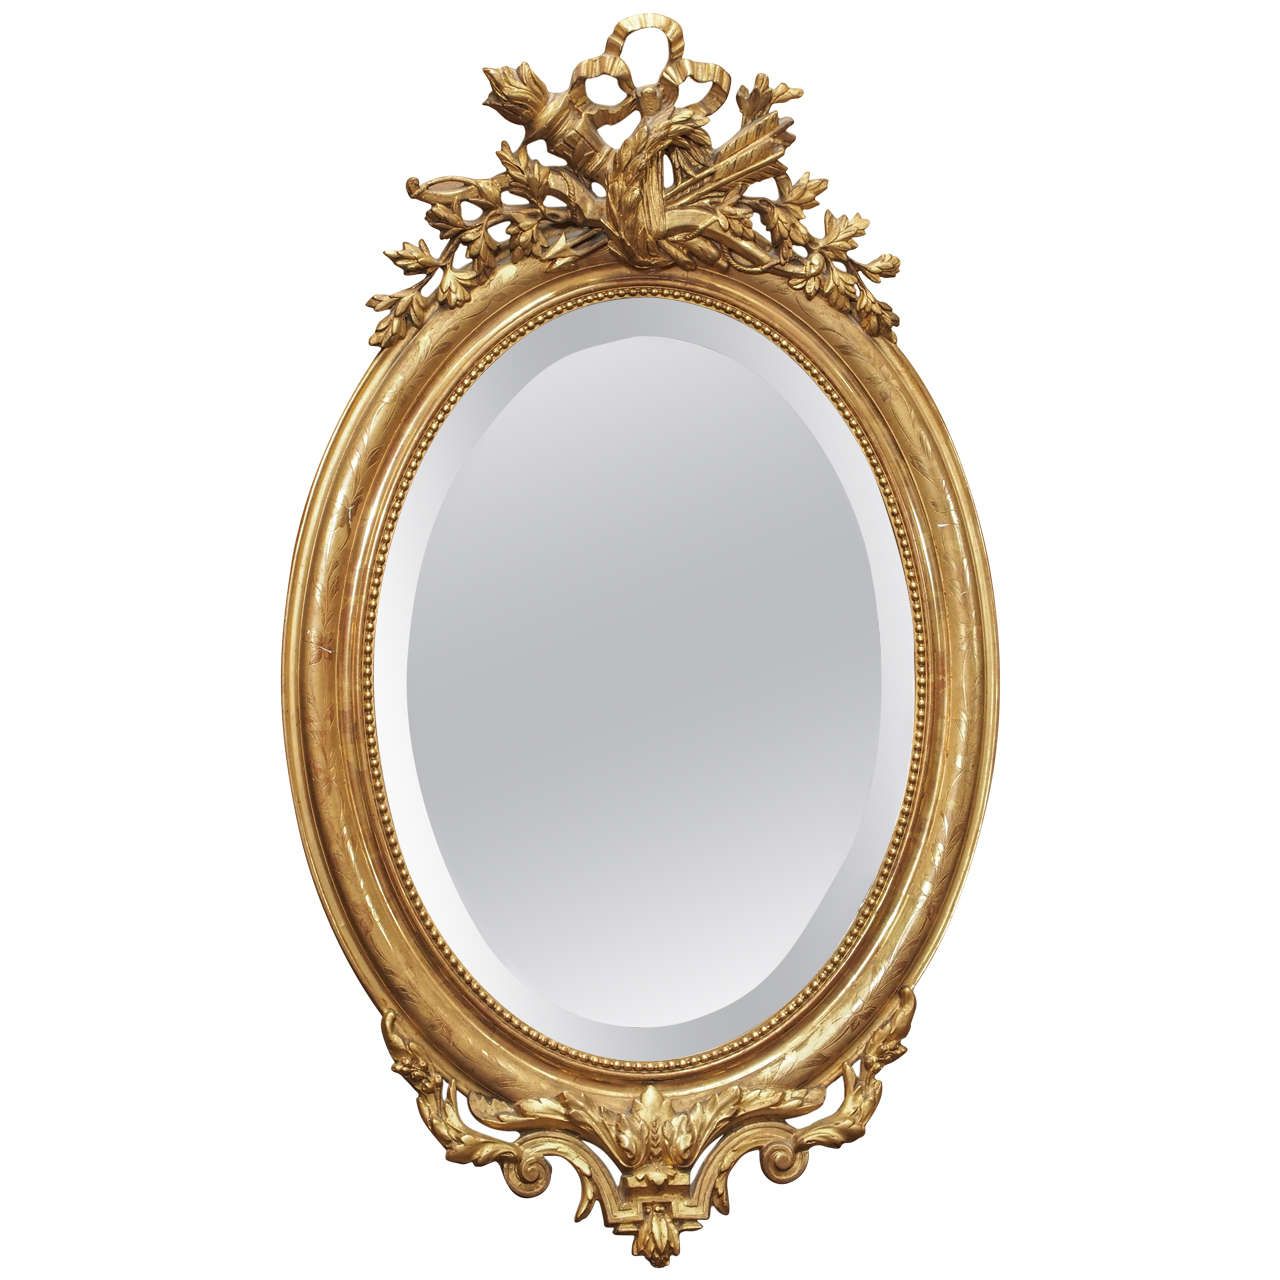 Lovely Oval Antique French Gold Beveled Mirror Circa 1850 At 1stdibs Intended For Antique Gold Cut Edge Wall Mirrors (View 14 of 15)